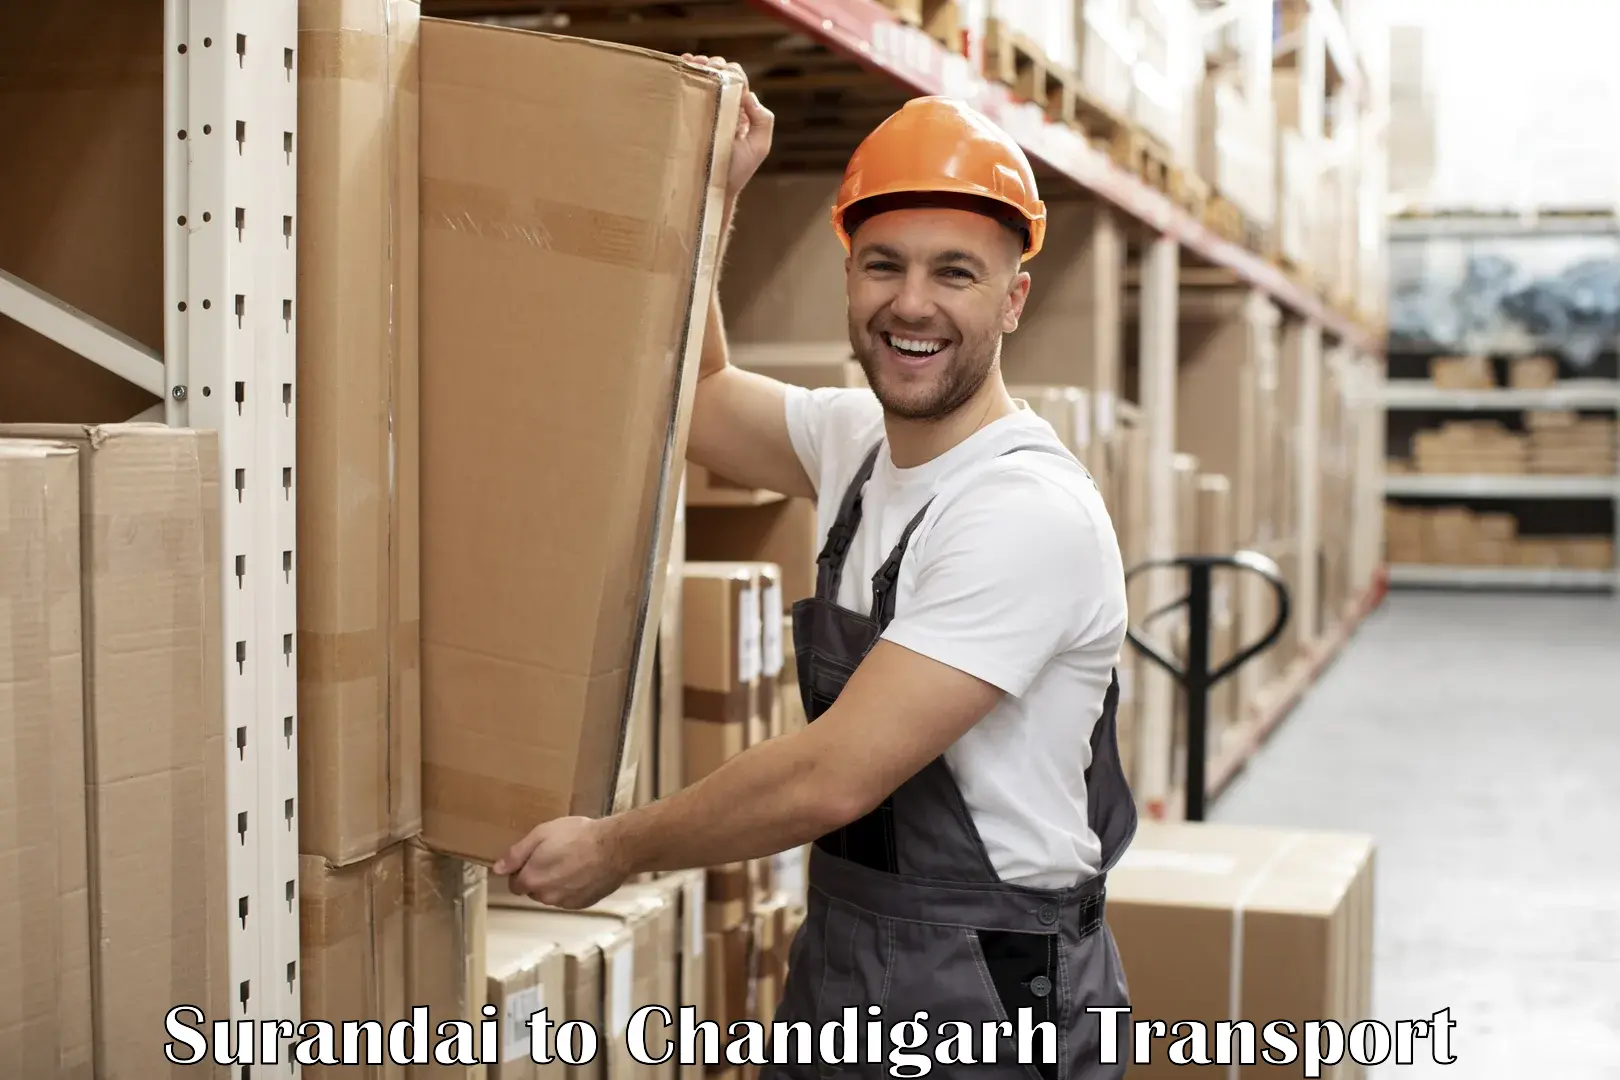 Container transport service Surandai to Chandigarh